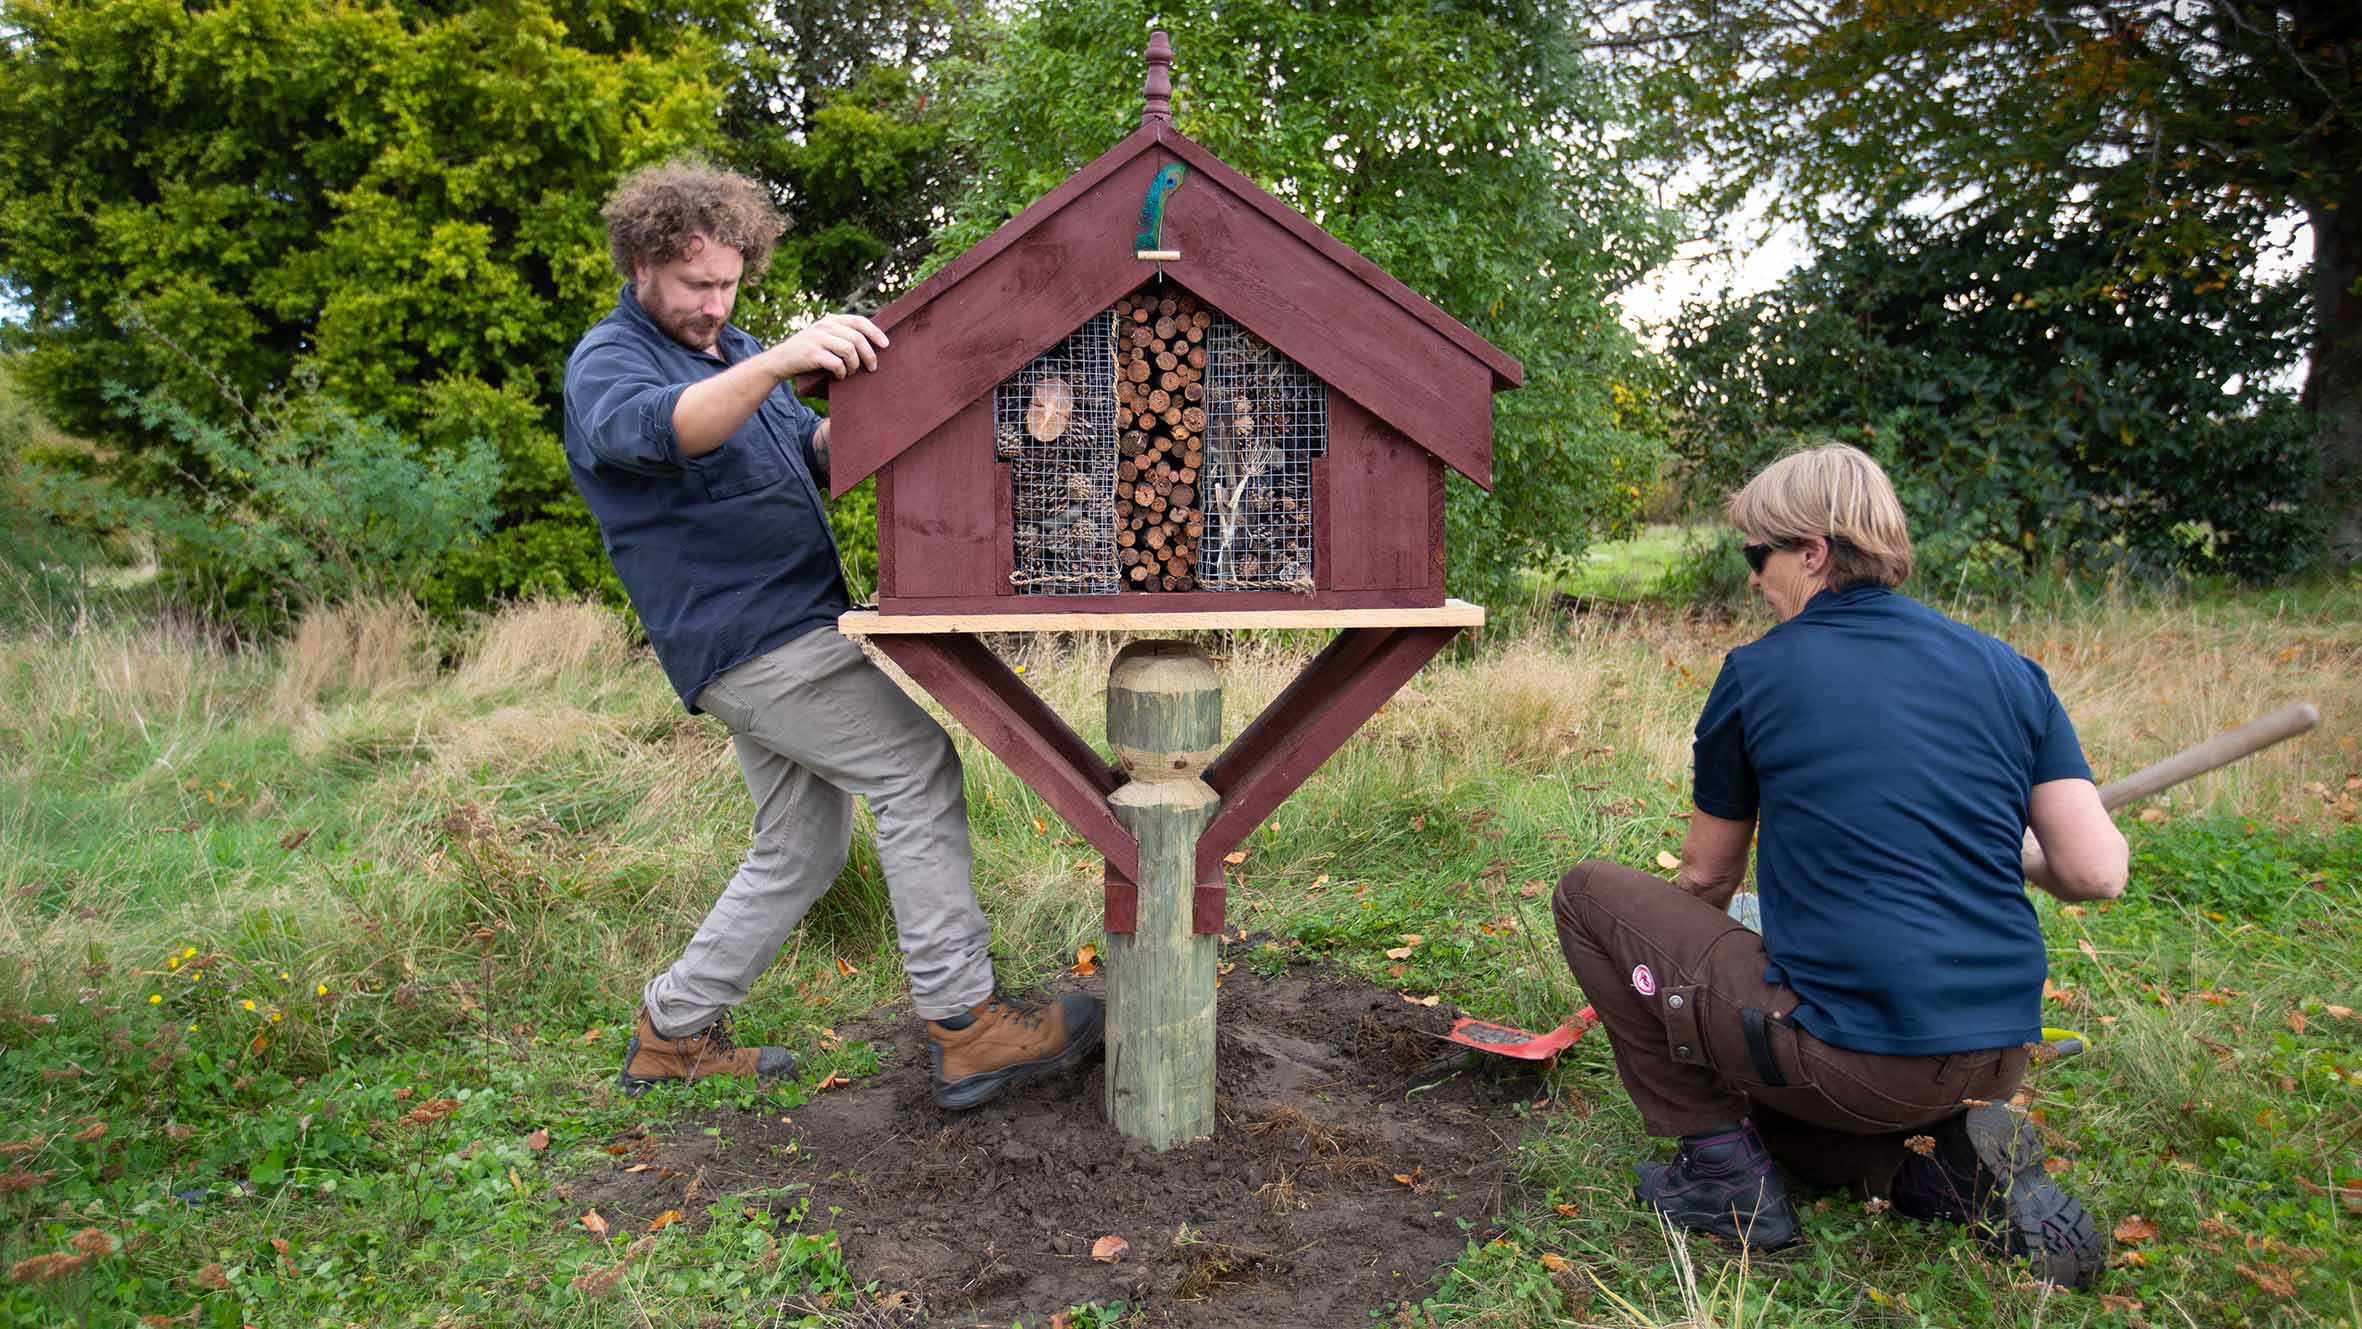 Honey, I’m home: Bug hotel for native bees in Christchurch’s former Red Zone